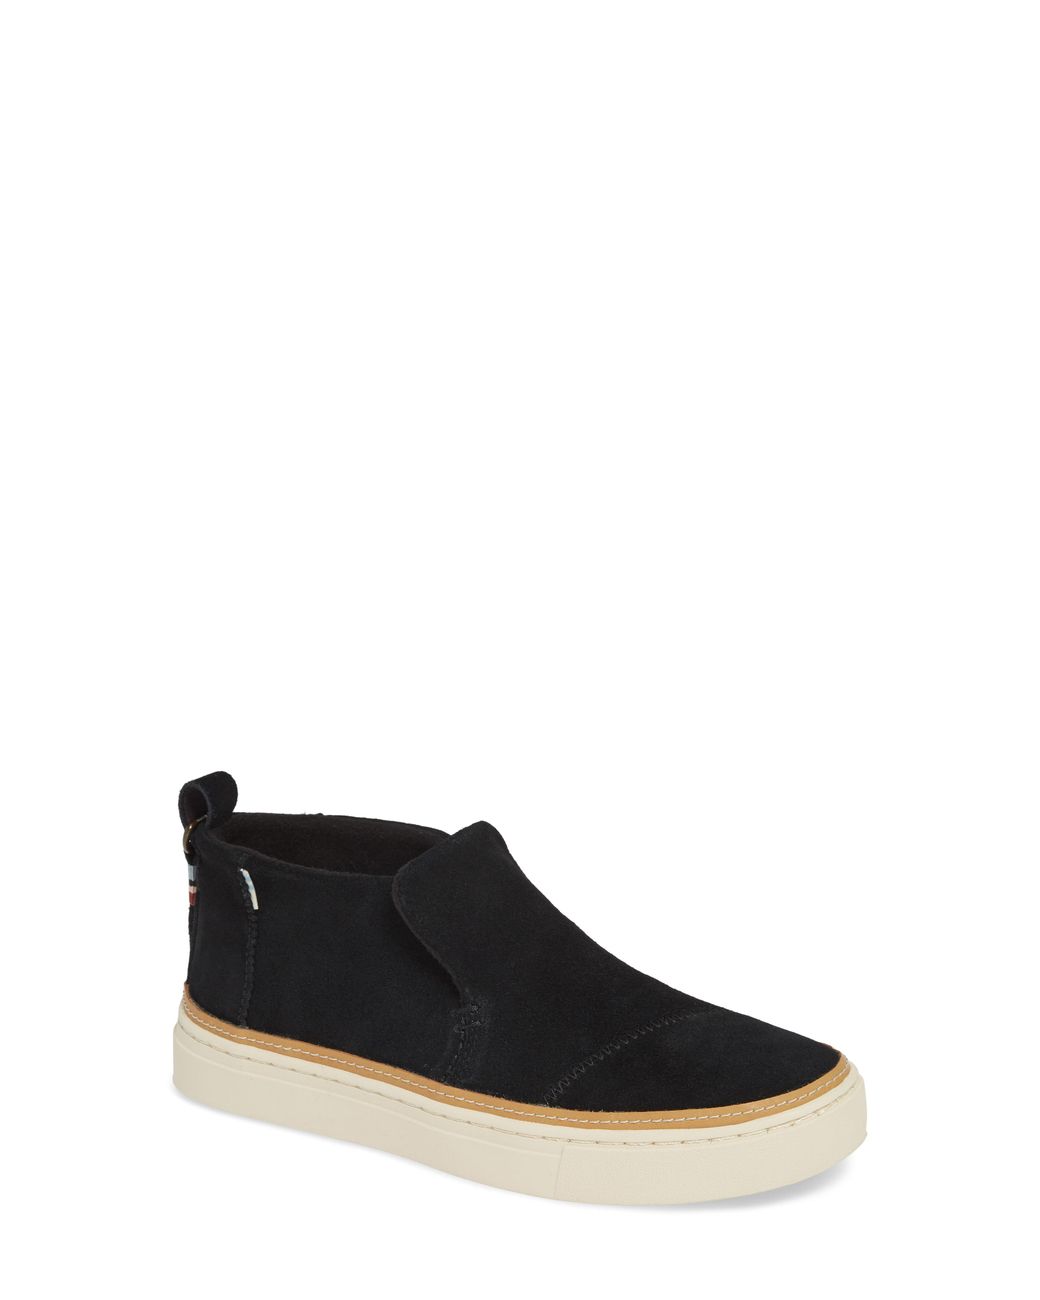 Lyst - Toms Paxton Suede Mid Slip On Trainers in Brown - Save 45. ...